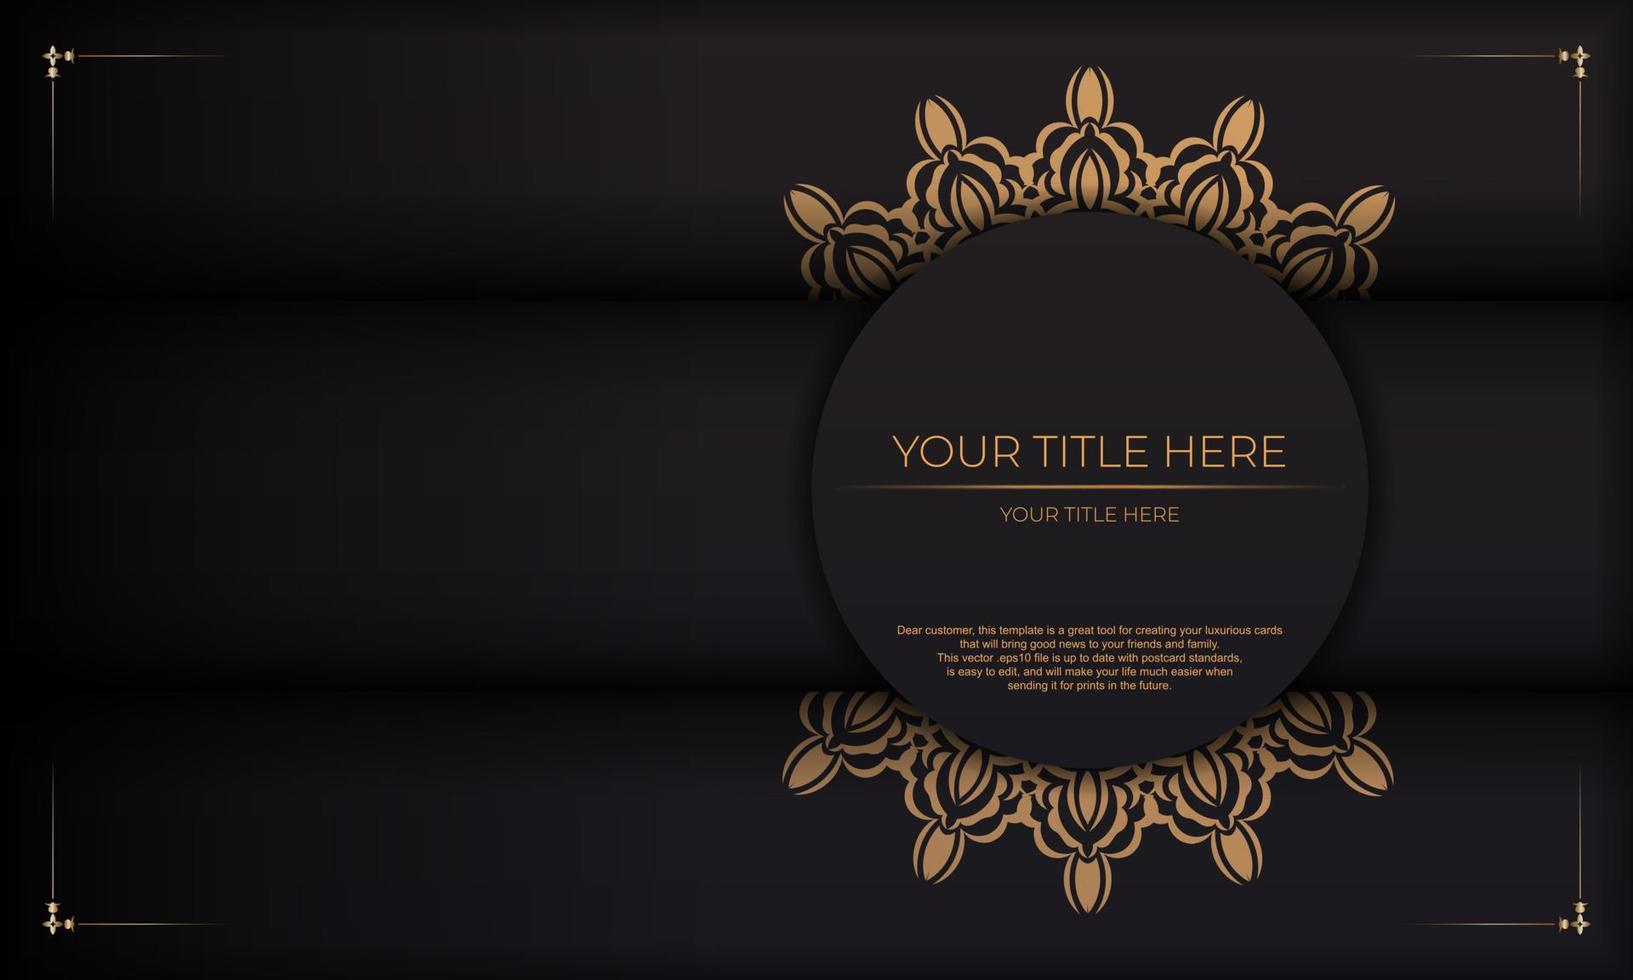 Luxurious background with vintage vintage ornaments and place for text. Print-ready invitation design with mandala ornament. vector